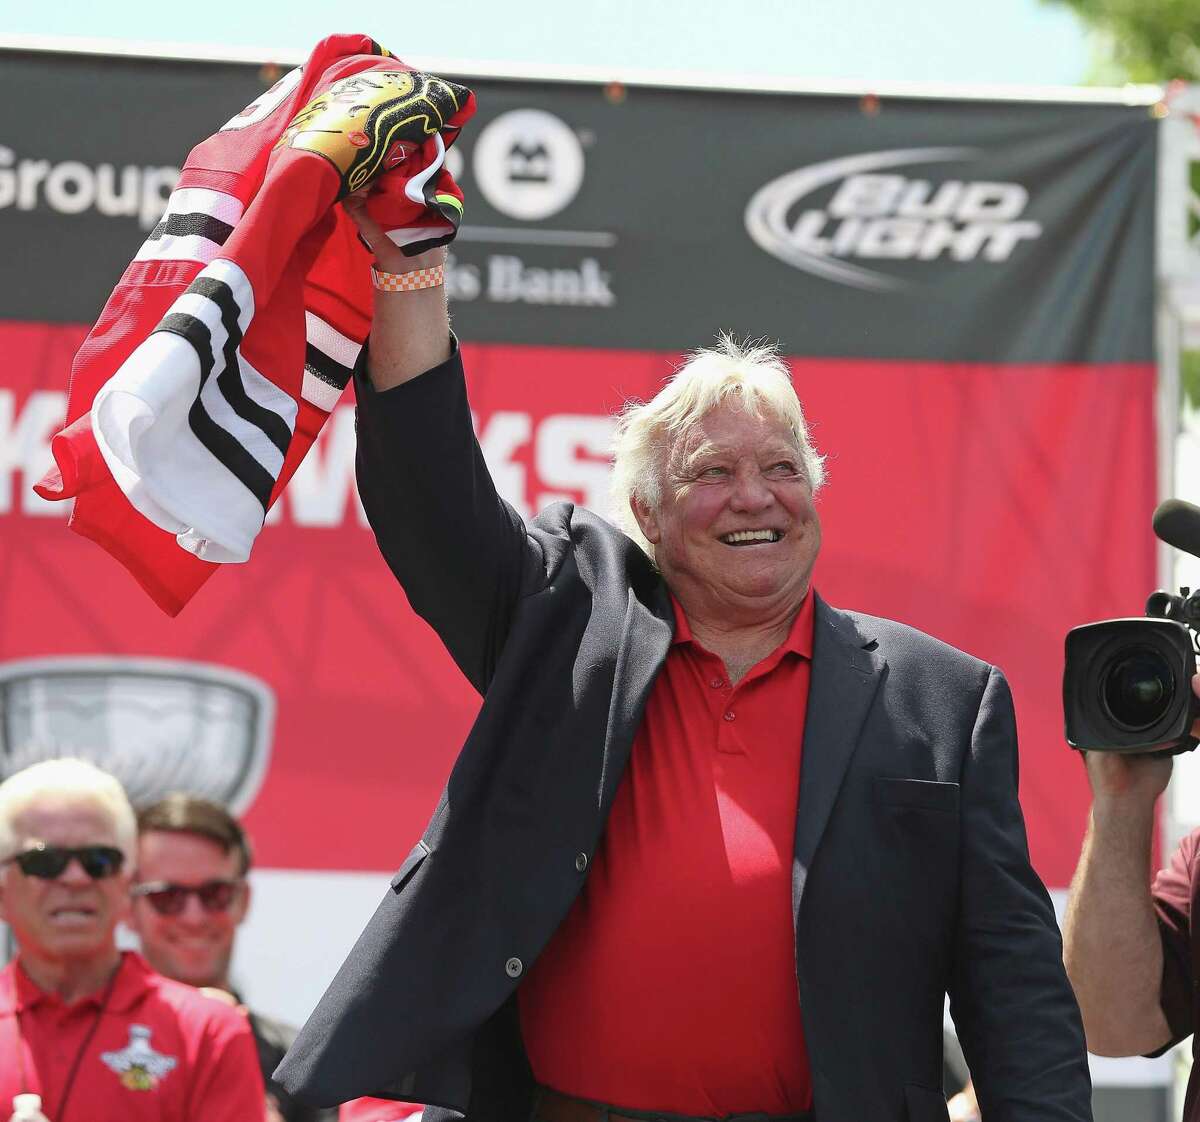 FILE - JANUARY 30, 2023: It was reported that Hockey Hall of Fame winger Bobby Hull died at age 84 on January 30, 2023 CHICAGO, IL - JUNE 28: Former player Bobby Hull of the Chicago Blackhawks waves to the crowd during the Blackhawks Victory Parade and Rally on June 28, 2013 in Chicago, Illinois. (Photo by Jonathan Daniel/Getty Images)